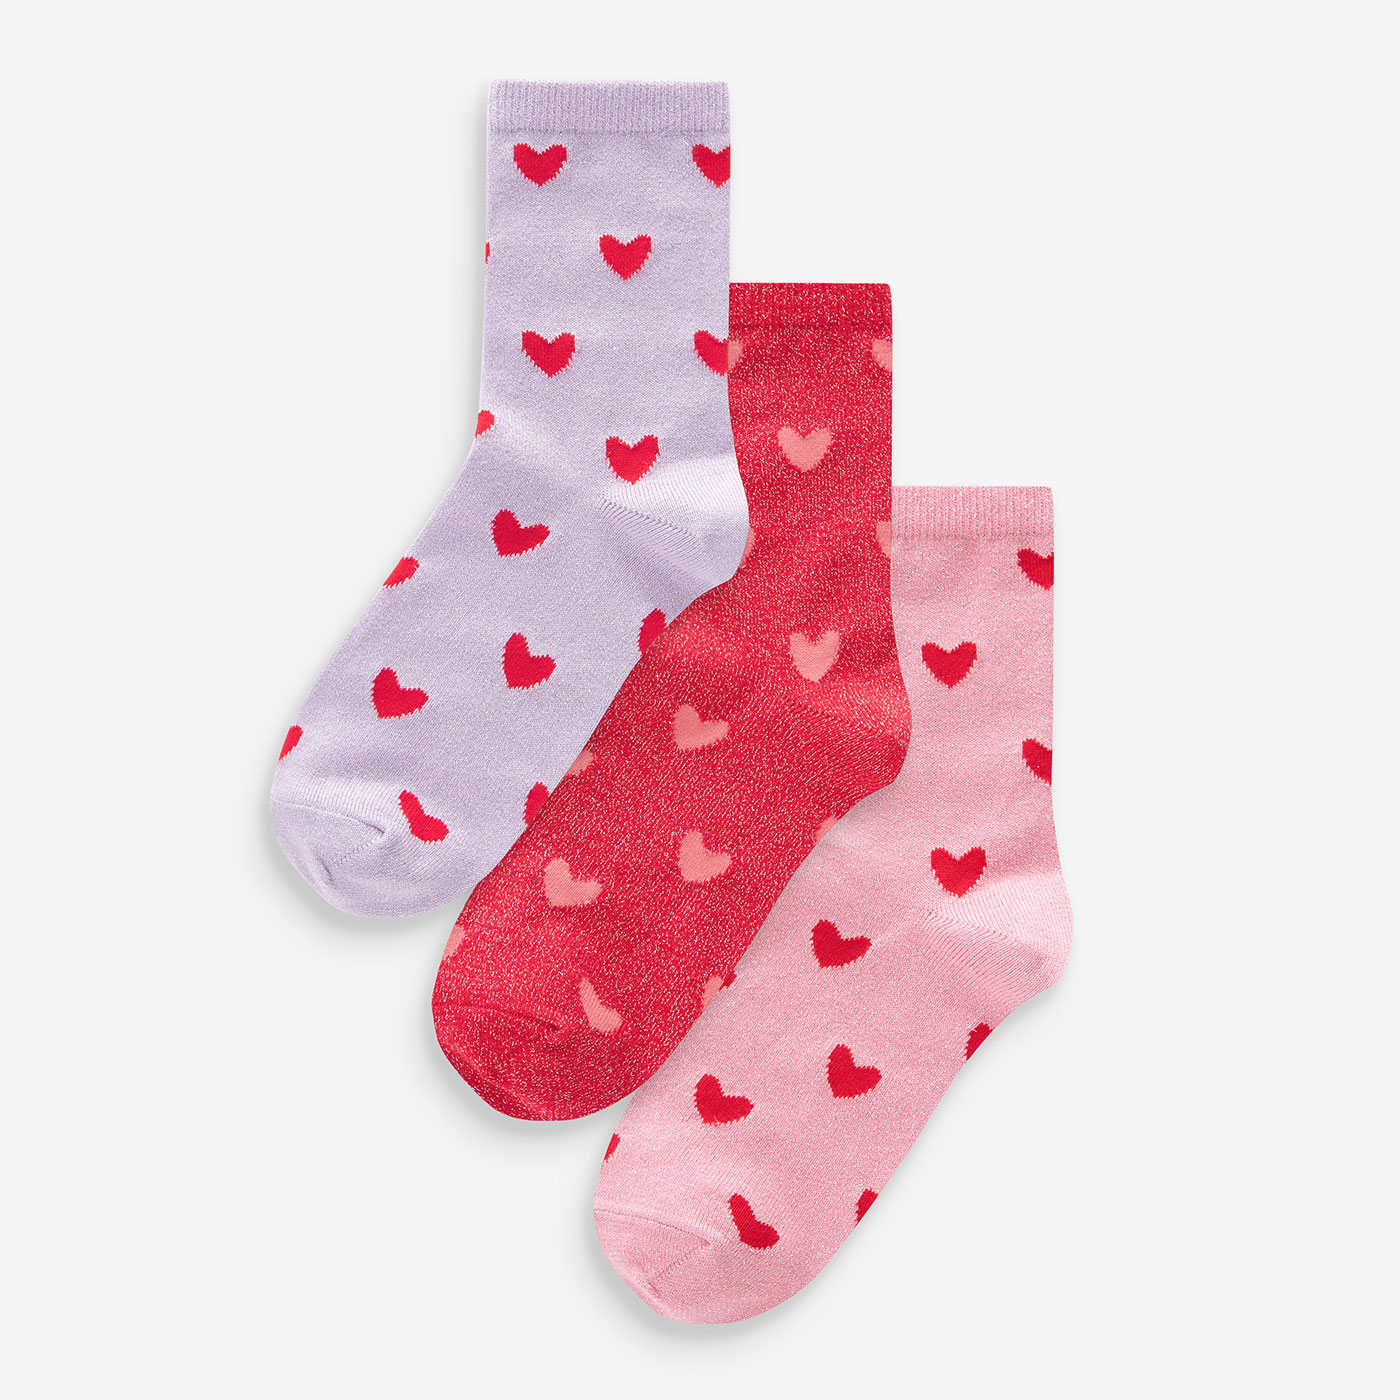 pink, red and purple heart socks